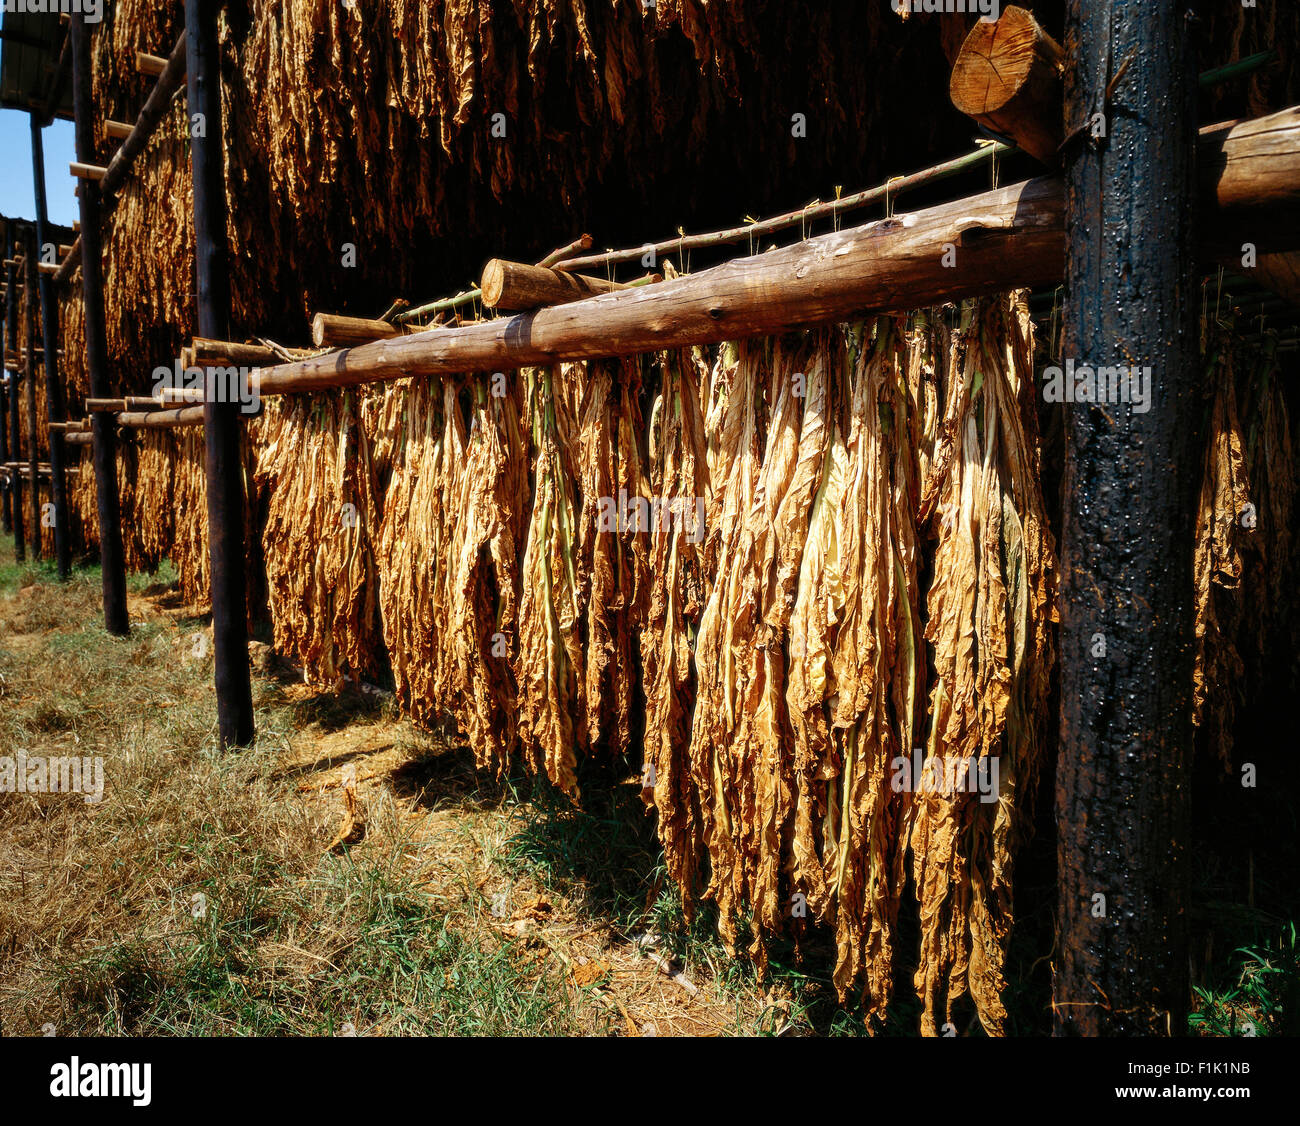 Tobacco Hanging to Dry Mpumalanga, South Africa Stock Photo